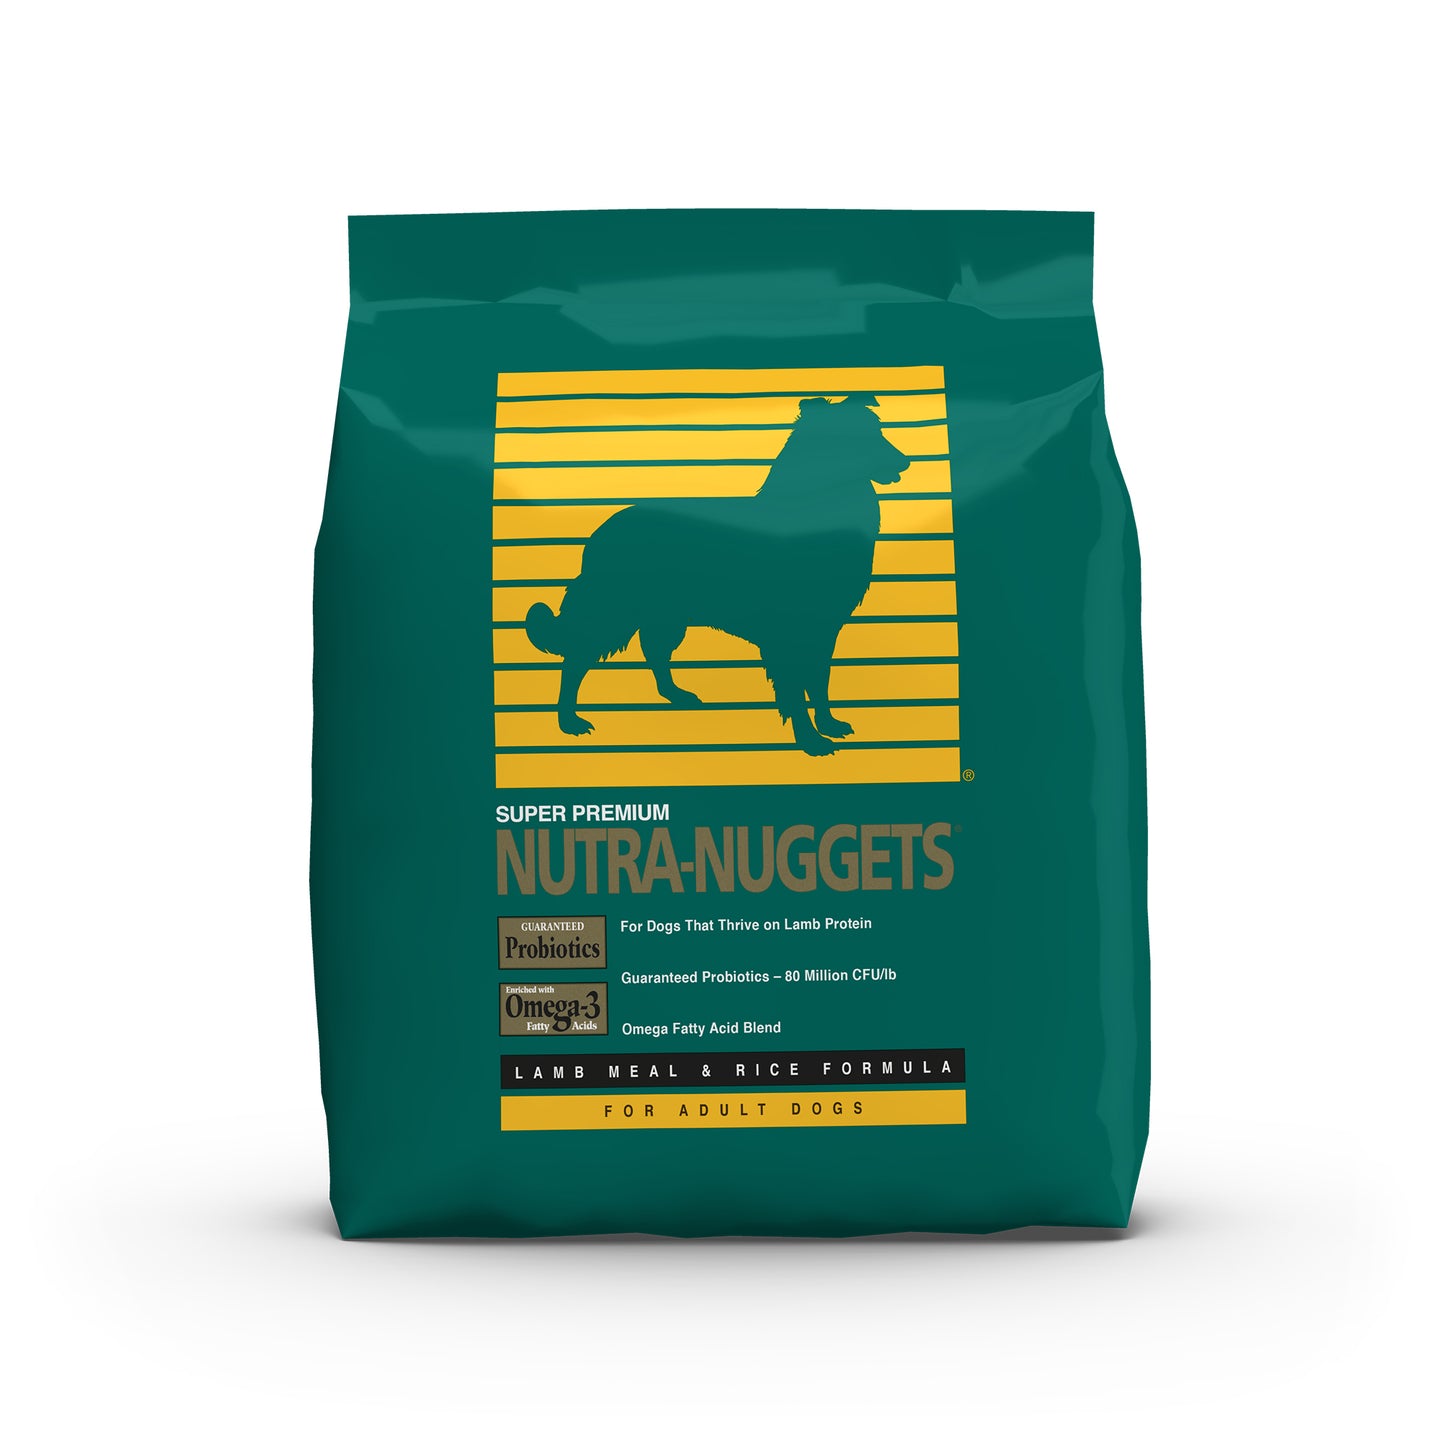 Nutra-Nuggets Lamb Meal and Rice Dry Dog Food, 40-lb Bag